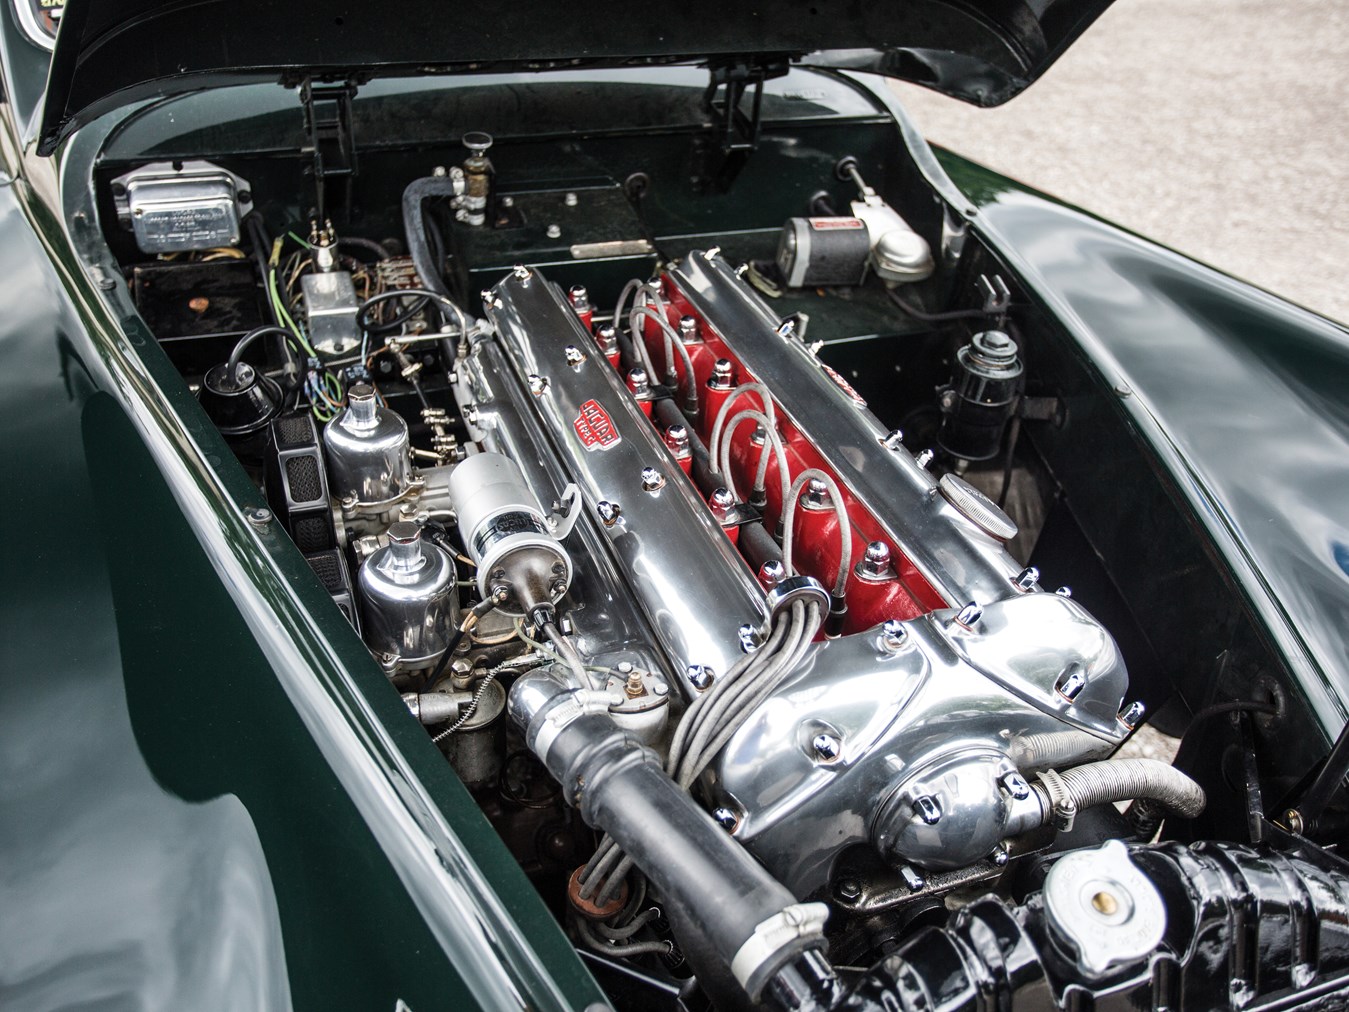 The DOHC Jaguar XK engine was intentionally designed to look fantastic as well as perform fantastically.